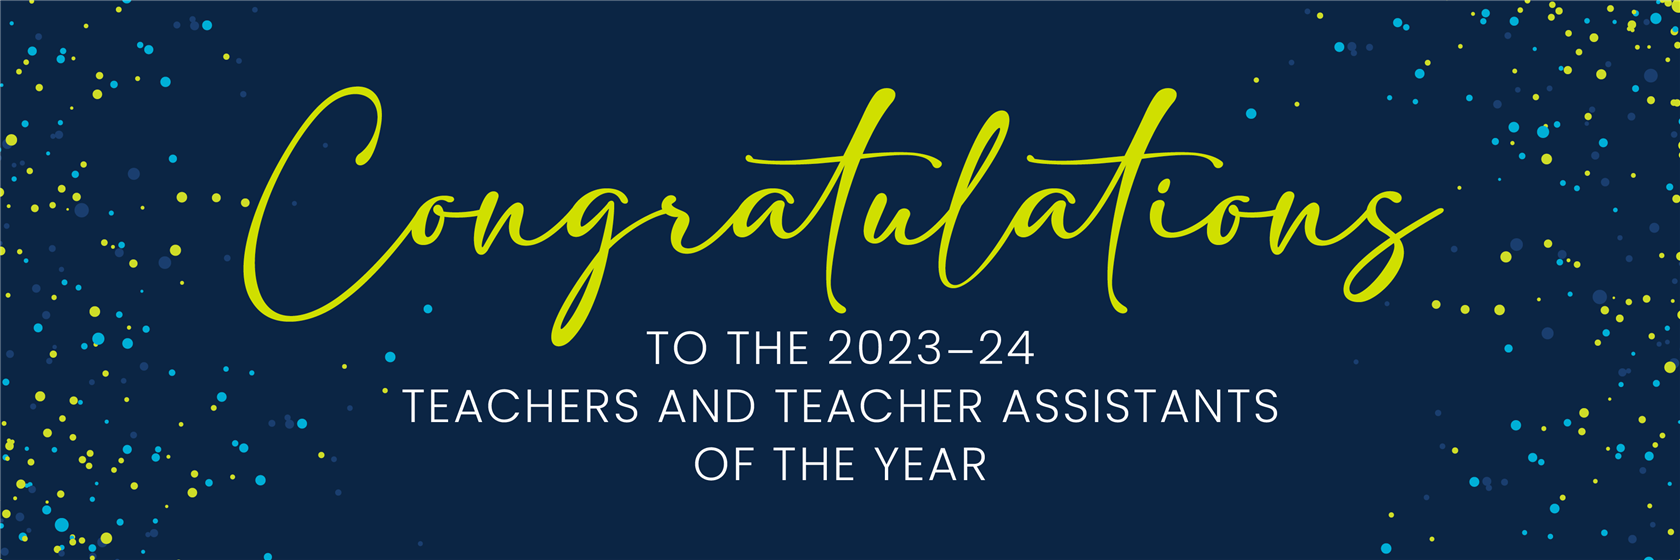 Congratulations to the 2023-24 Teachers and Teacher Assistants of the Year